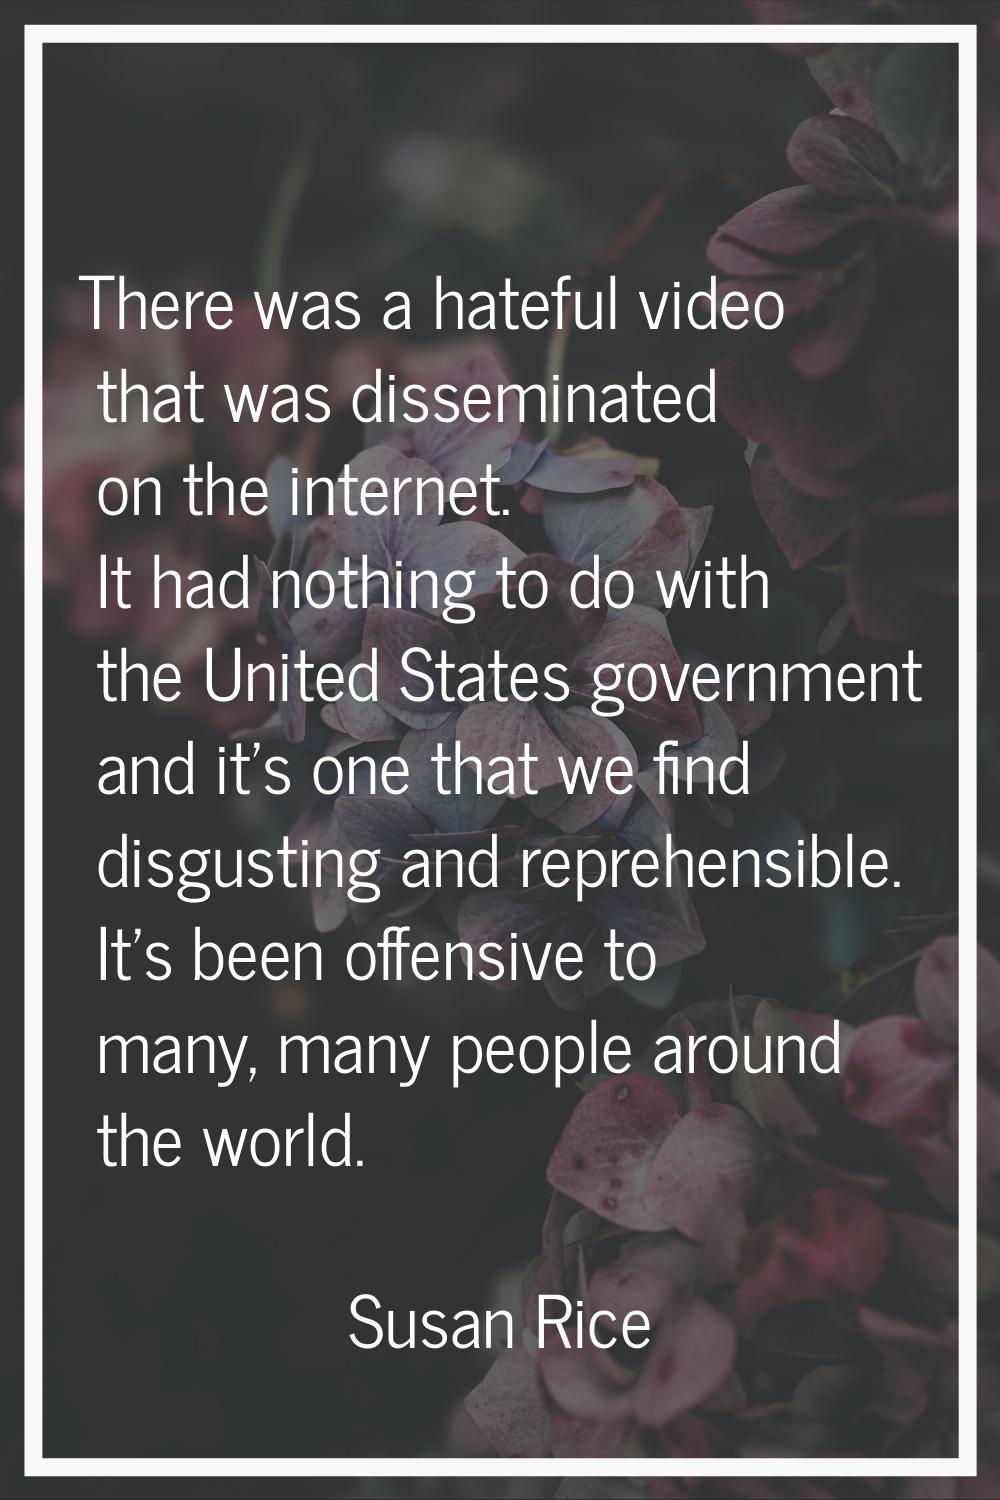 There was a hateful video that was disseminated on the internet. It had nothing to do with the Unit